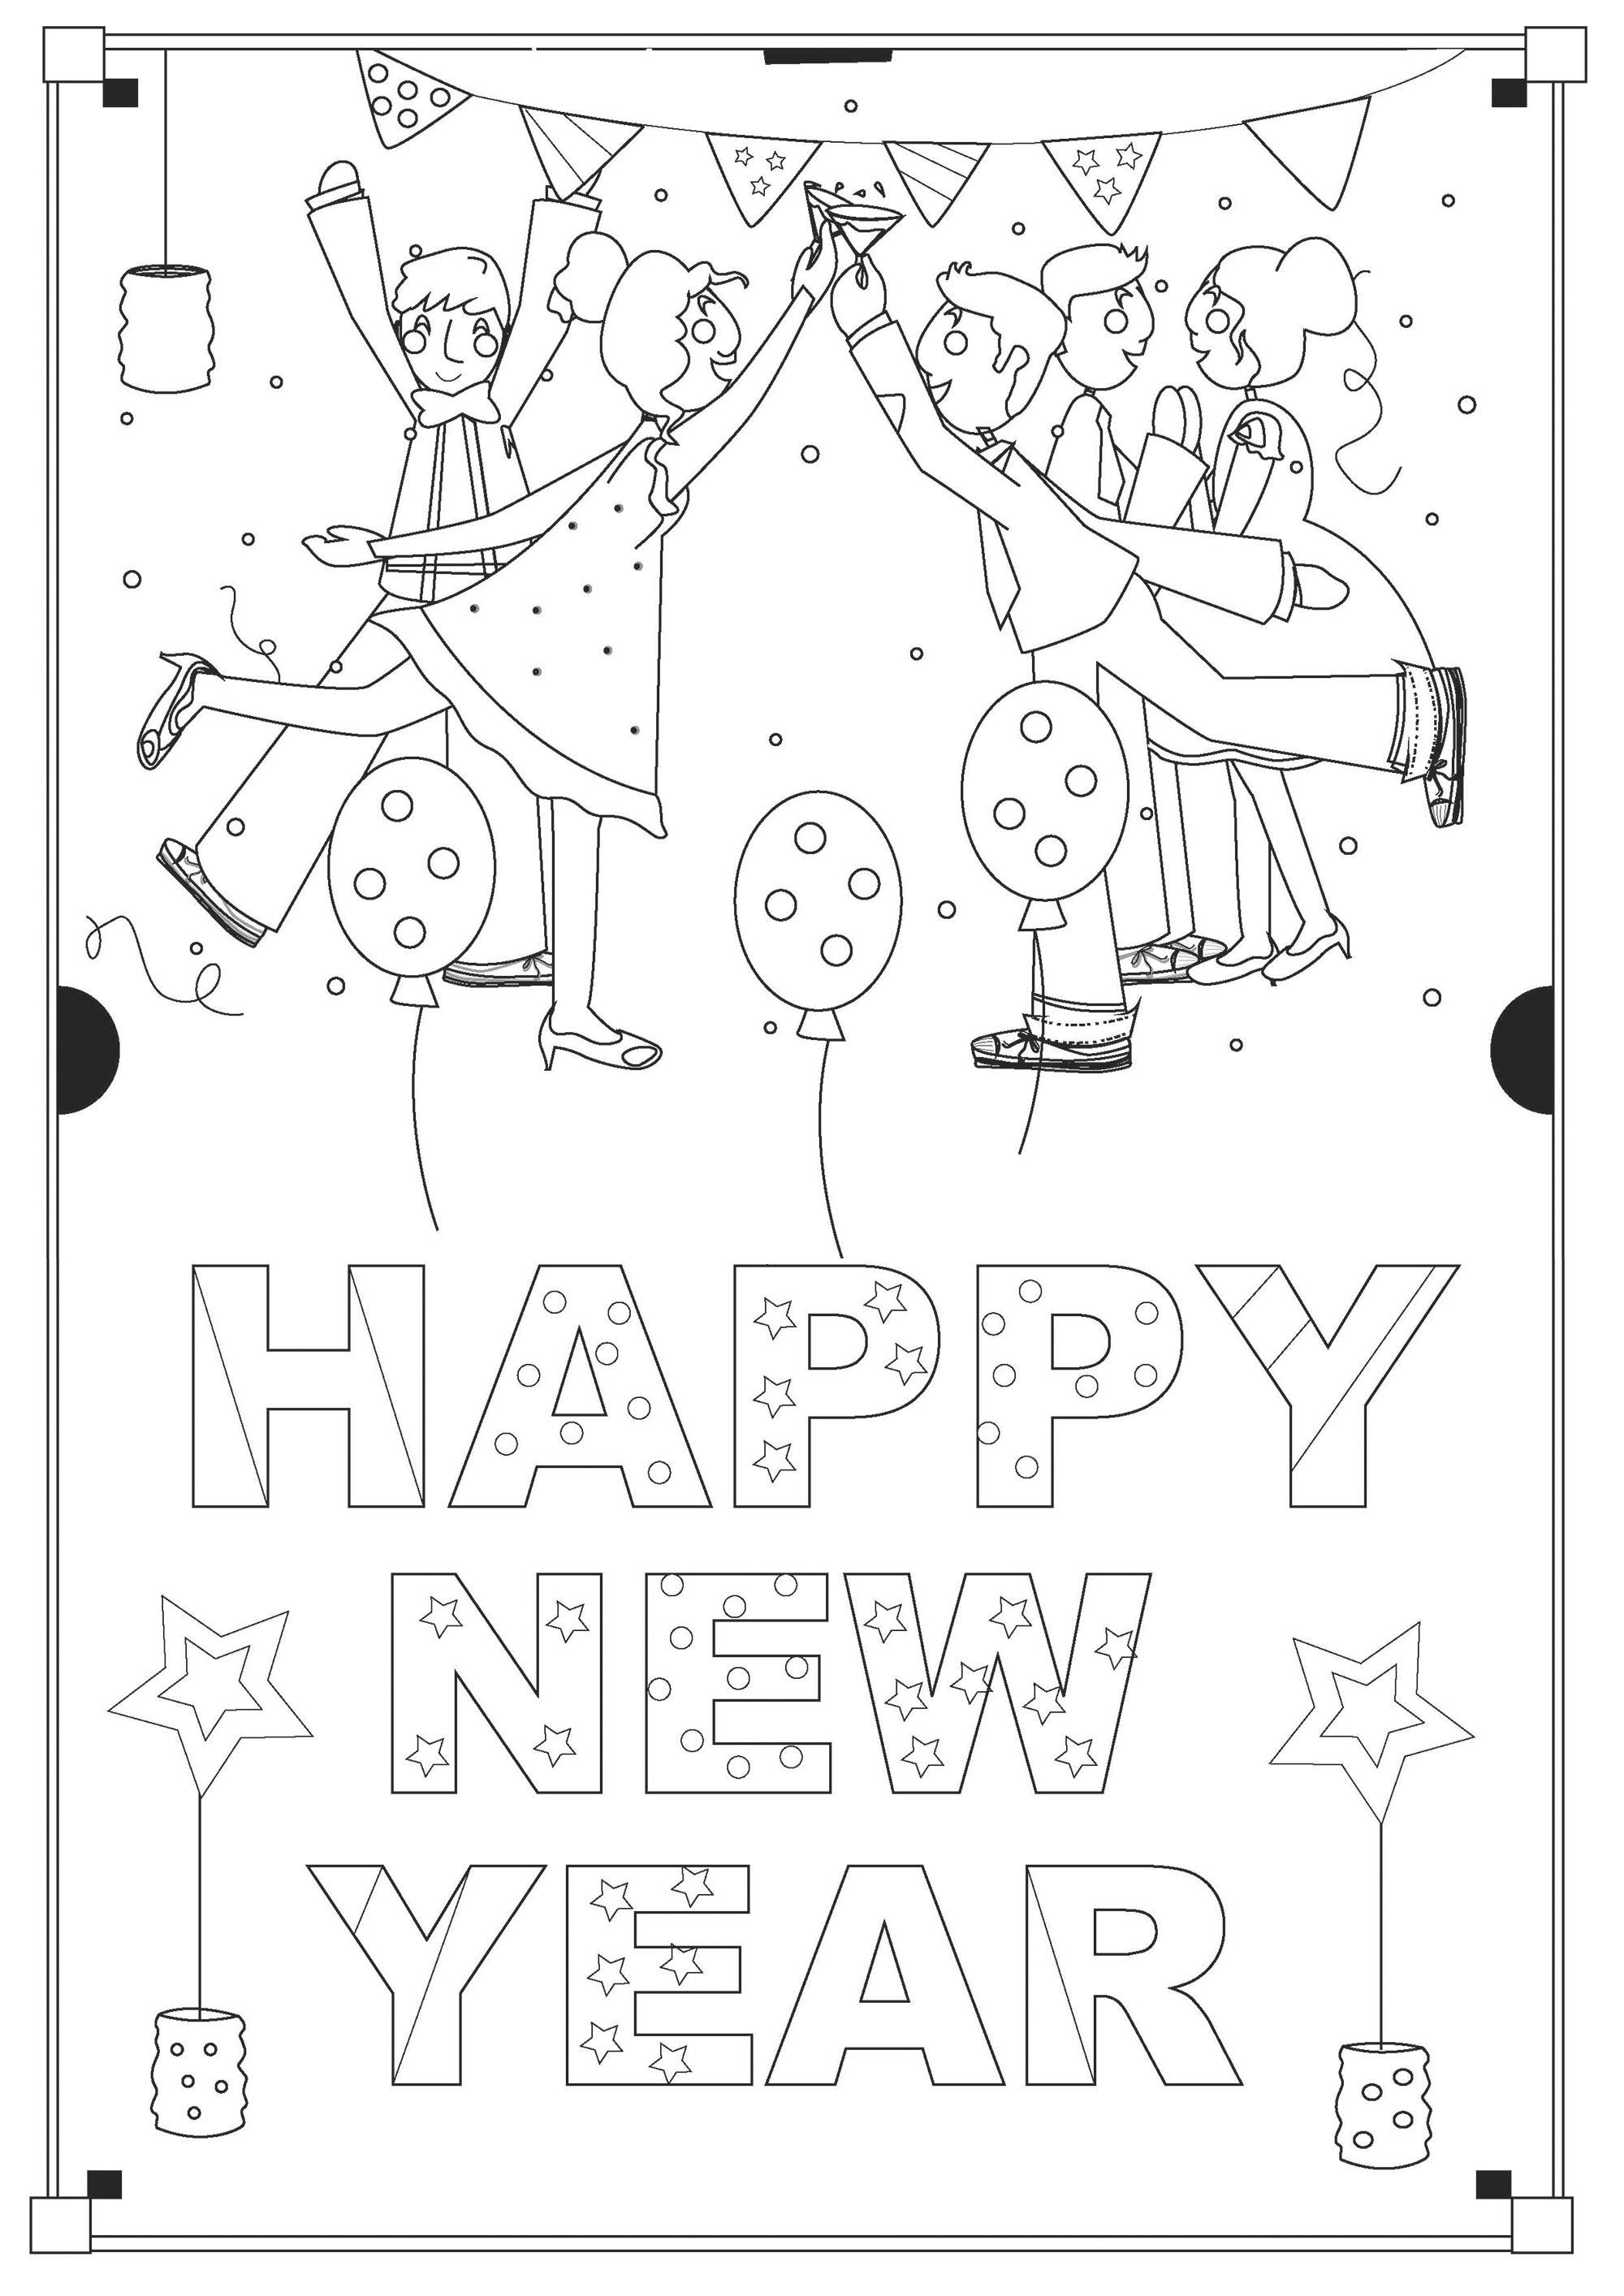 It's New Year's Eve!, Artist : Gaelle Picard